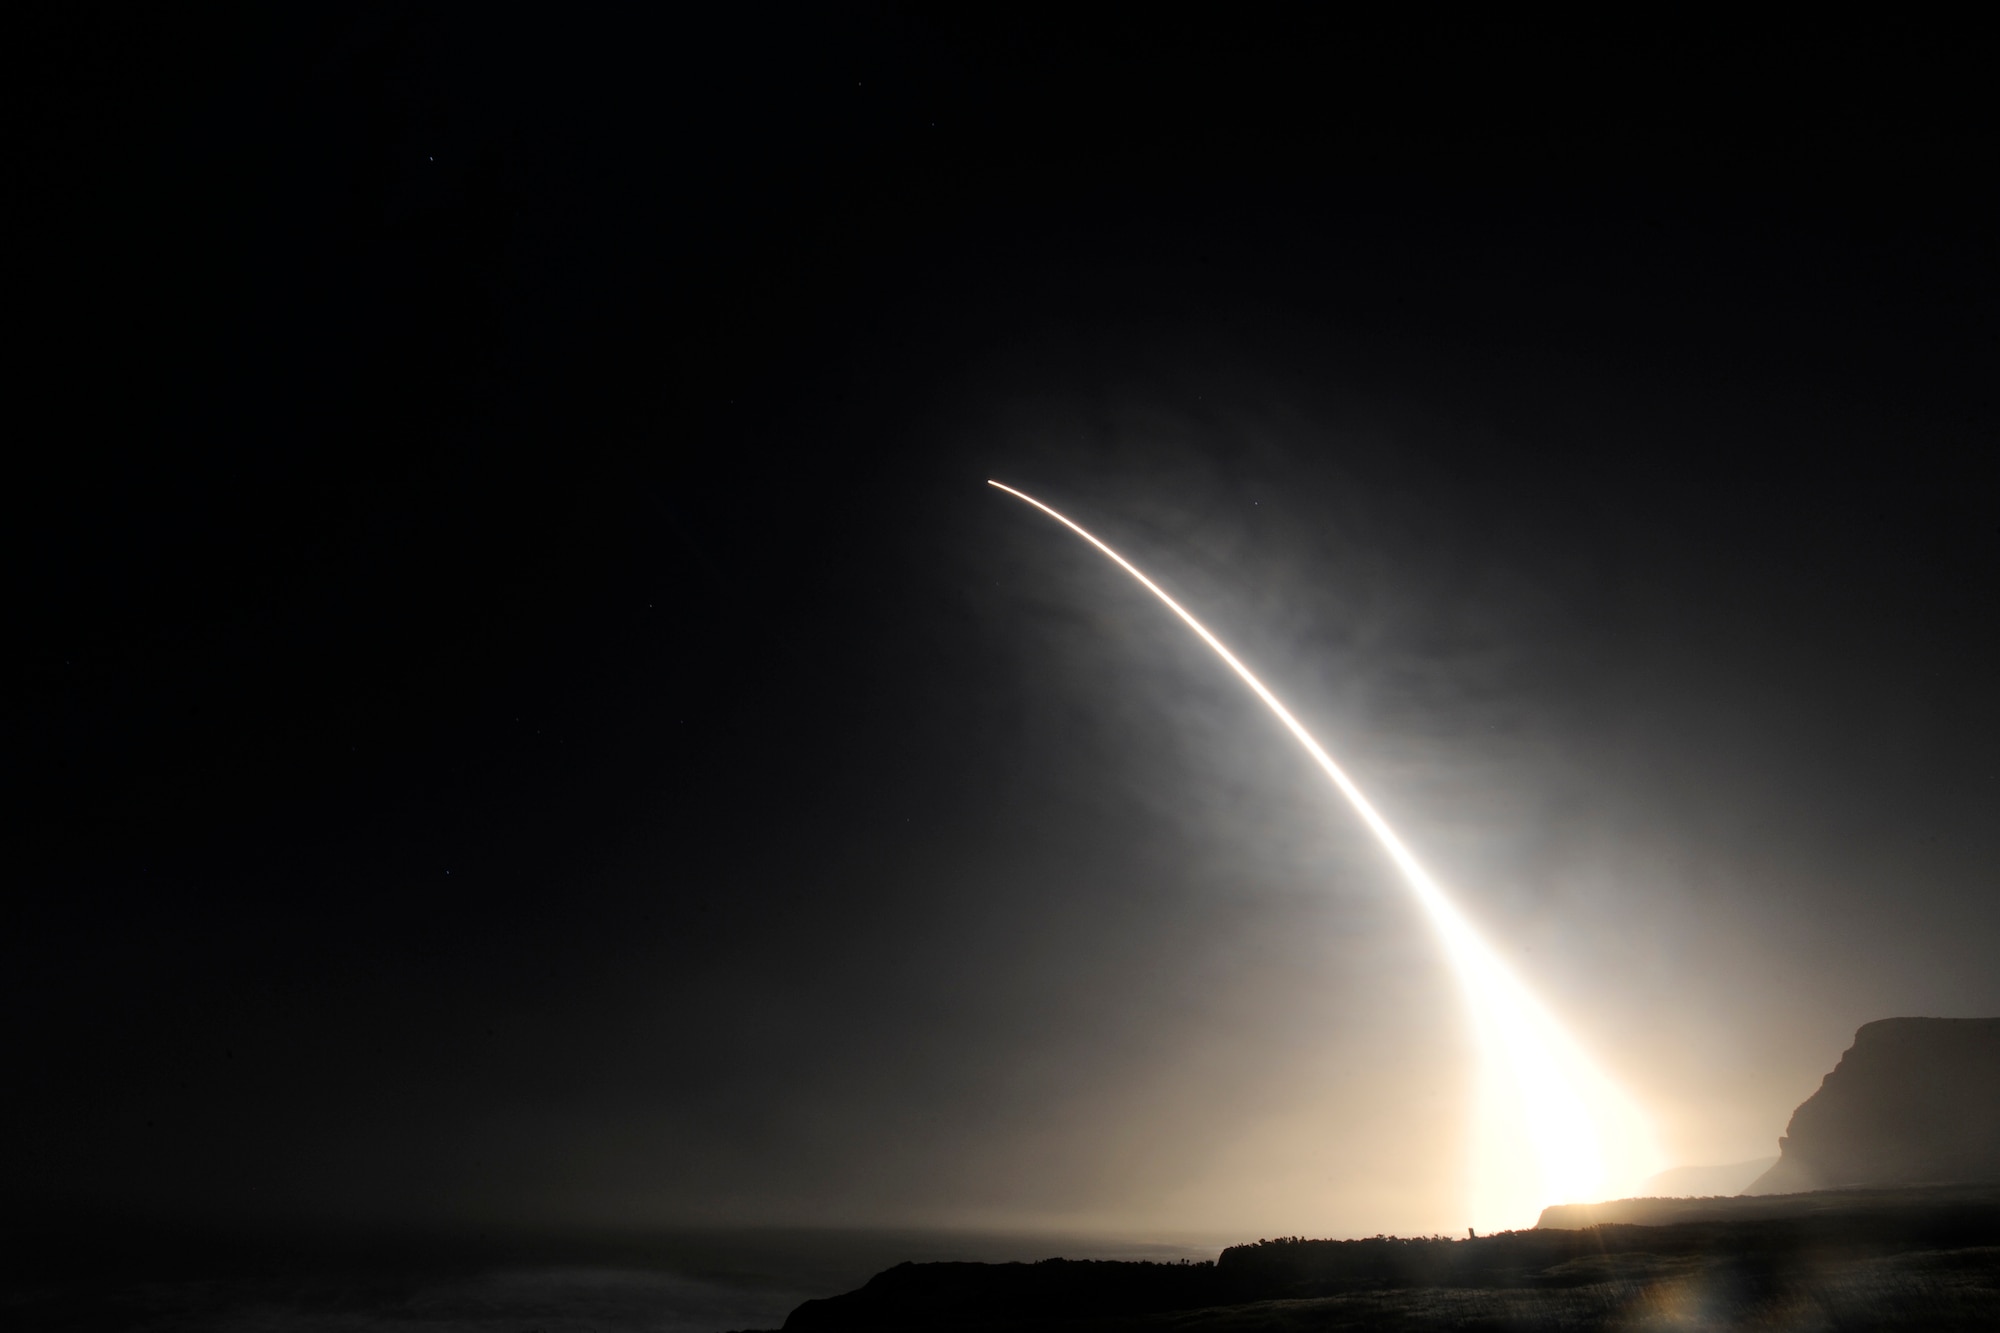 An unarmed Minuteman III intercontinental ballistic missile launches during an operational test at 11:34 p.m. PST here Feb. 20, 2016, Vandenberg Air Force Base, Calif. (U.S. Air Force Photo by Michael Peterson/Released)